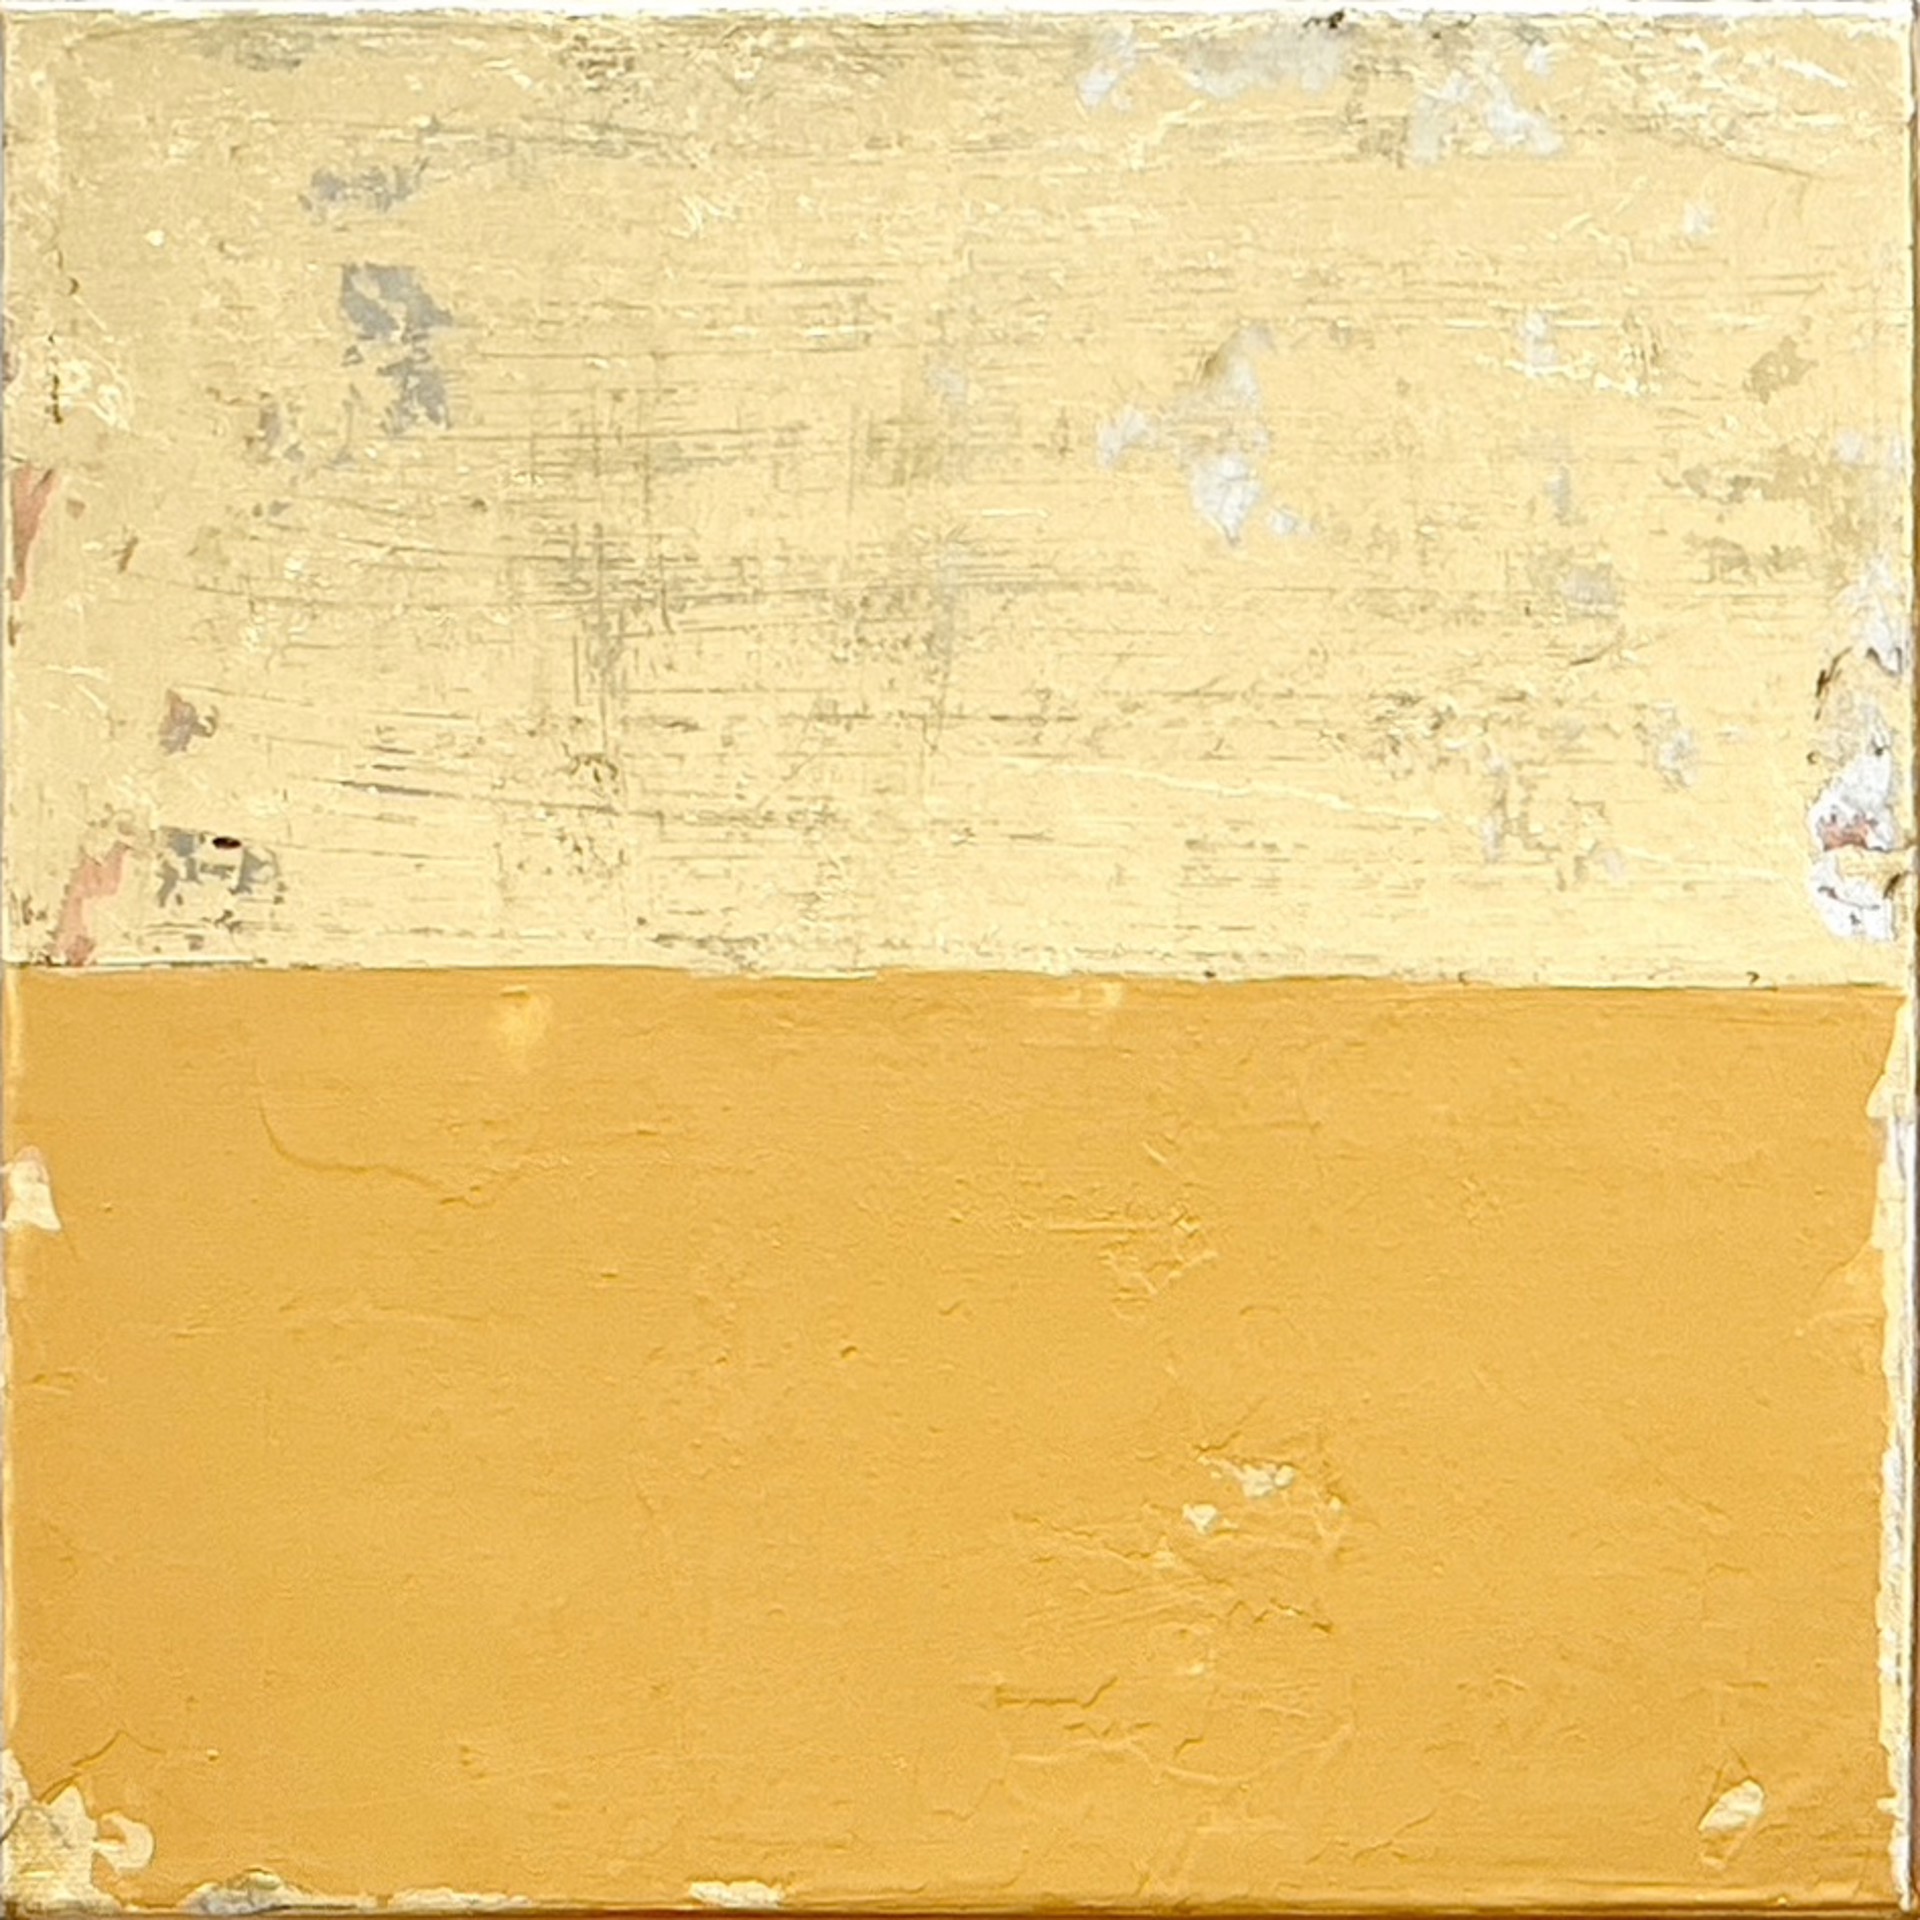 Gold And Gold (GG050) is 1 of 4 gold leaf mixed media panels from Japanese painter and artist Takefumi Hori.